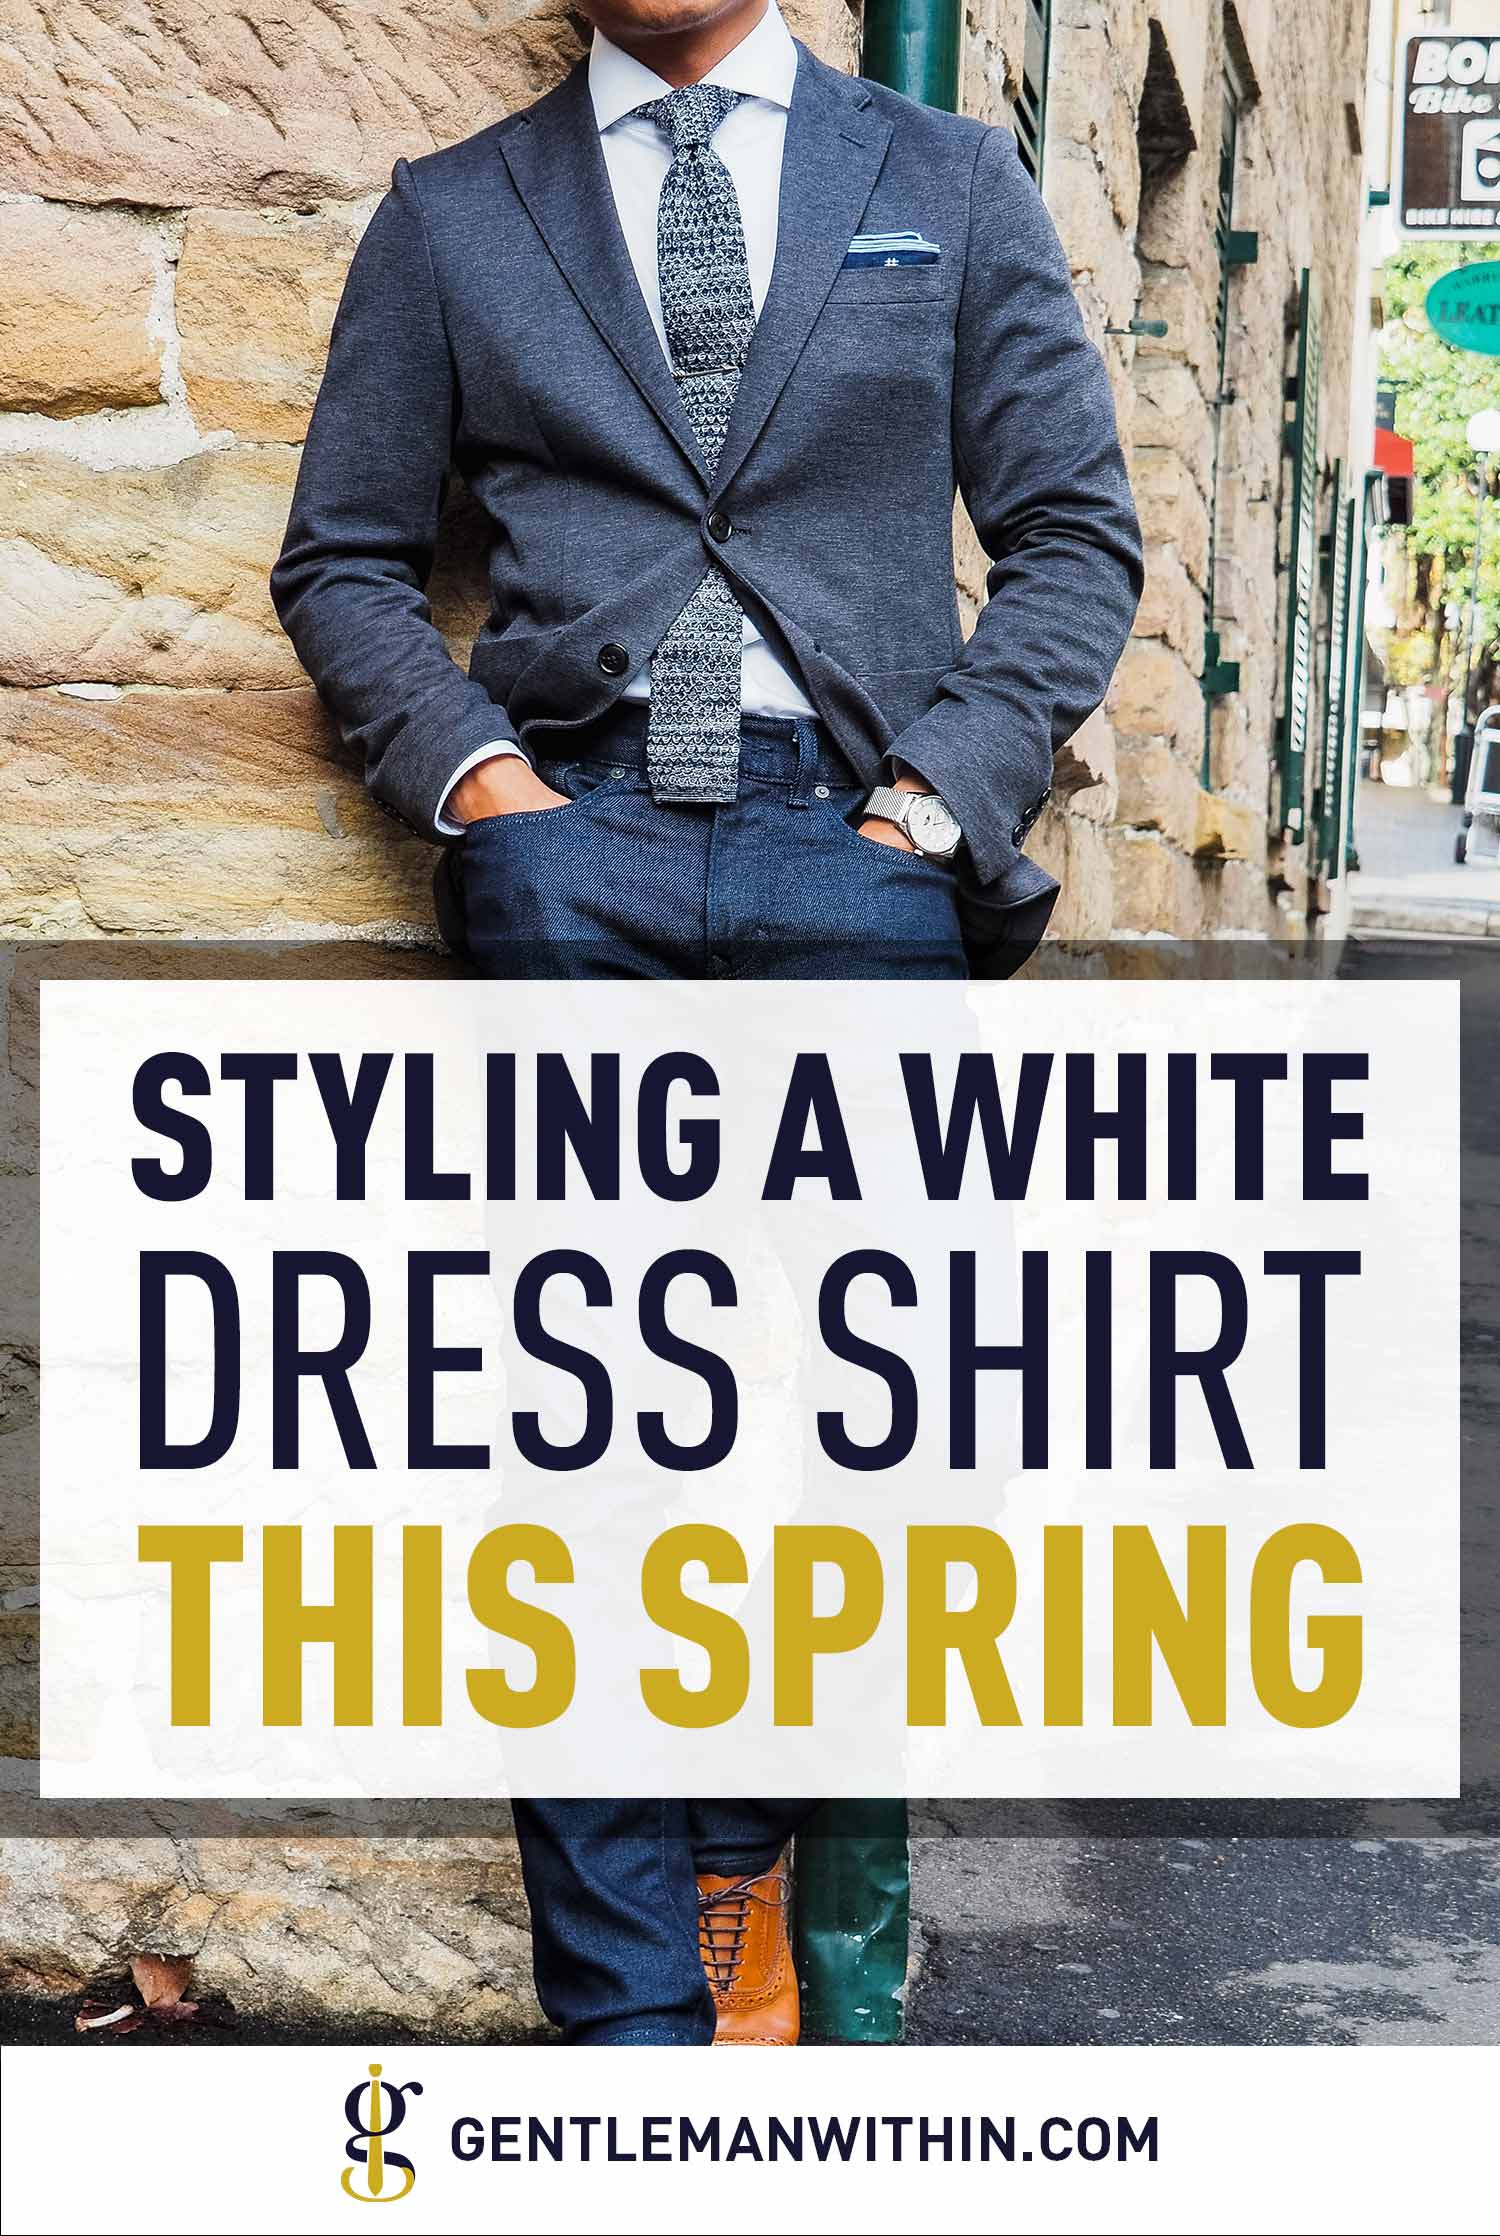 How To Wear A White Shirt Featuring Woodies Clothing | GENTLEMAN WITHIN